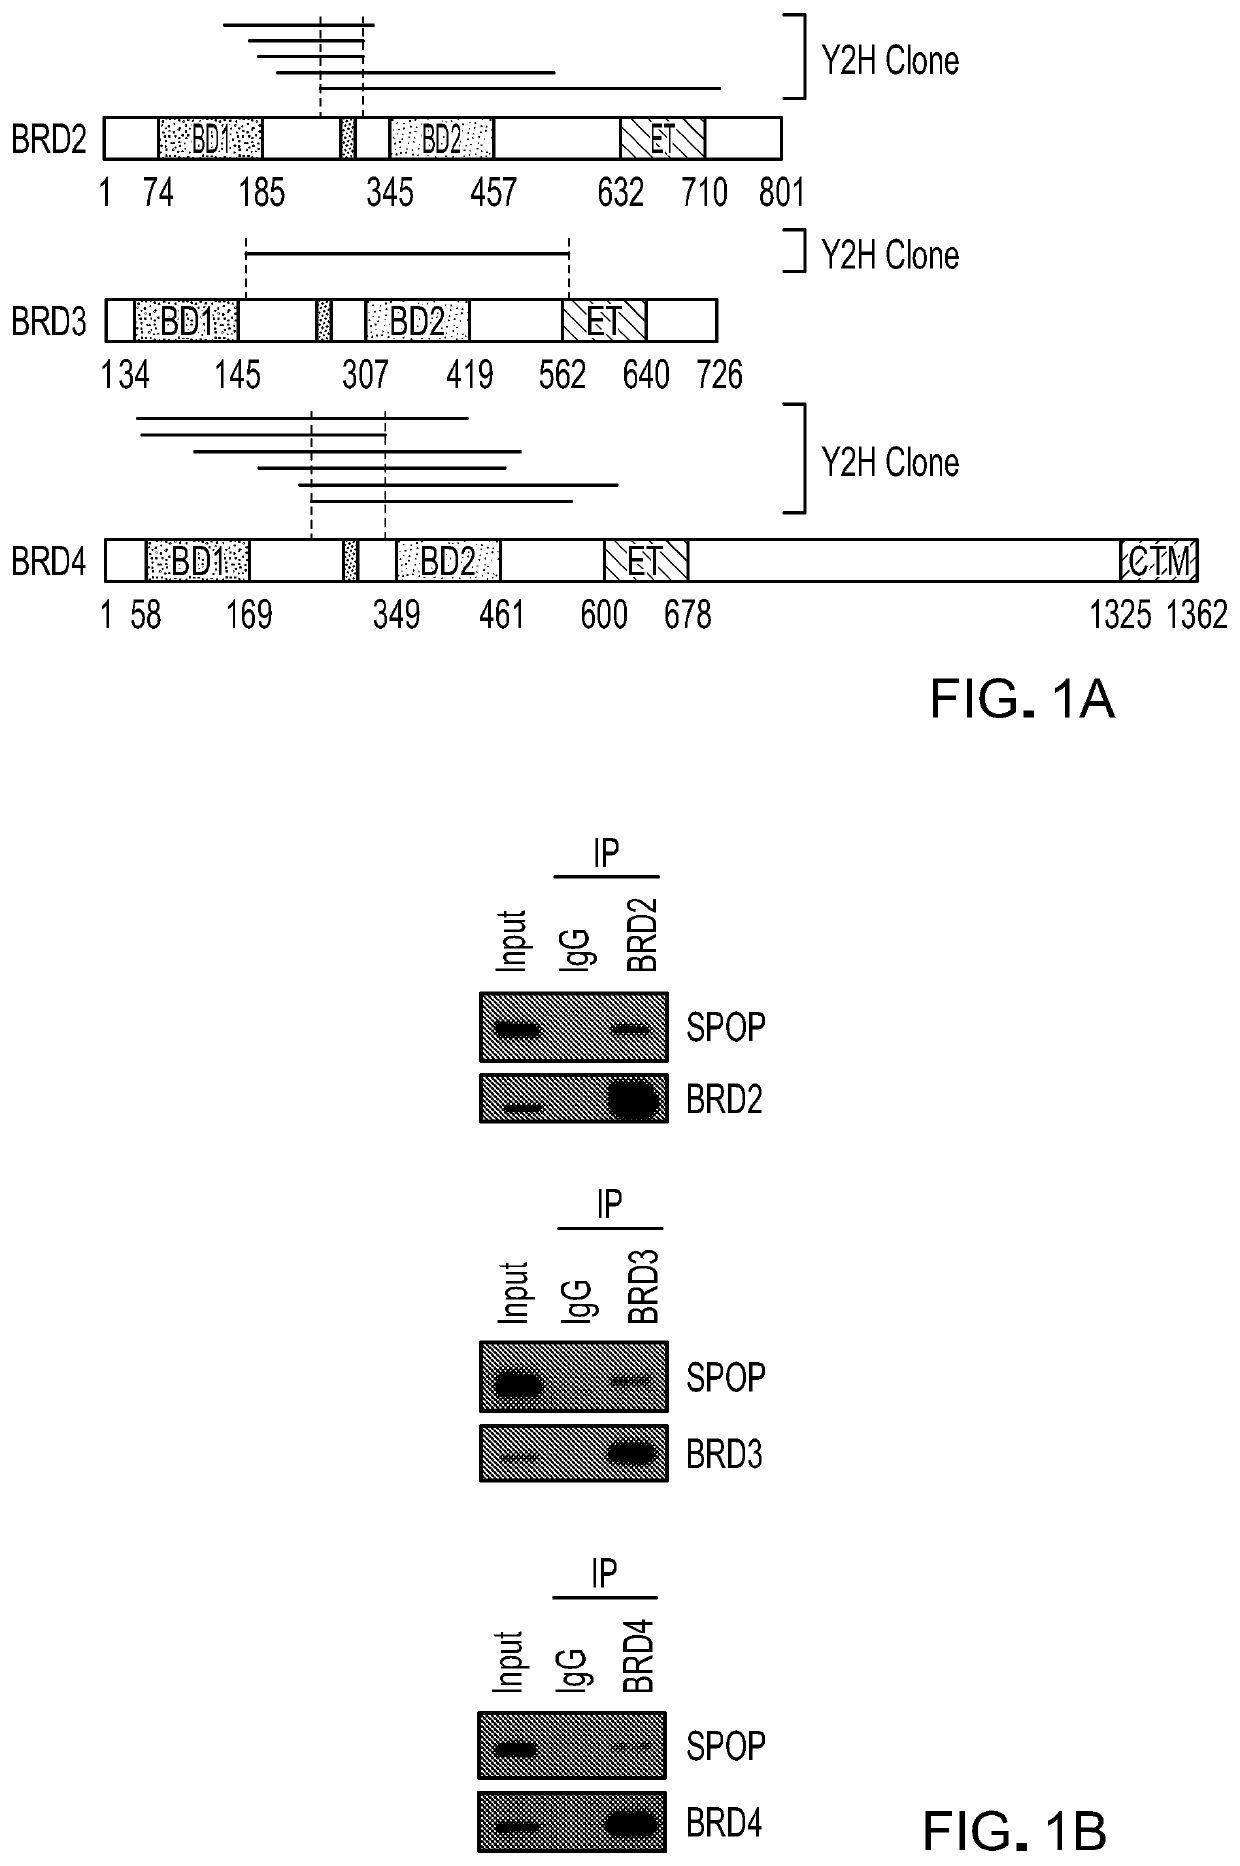 Methods and materials for identifying and treating bet inhibitor-resistant cancers